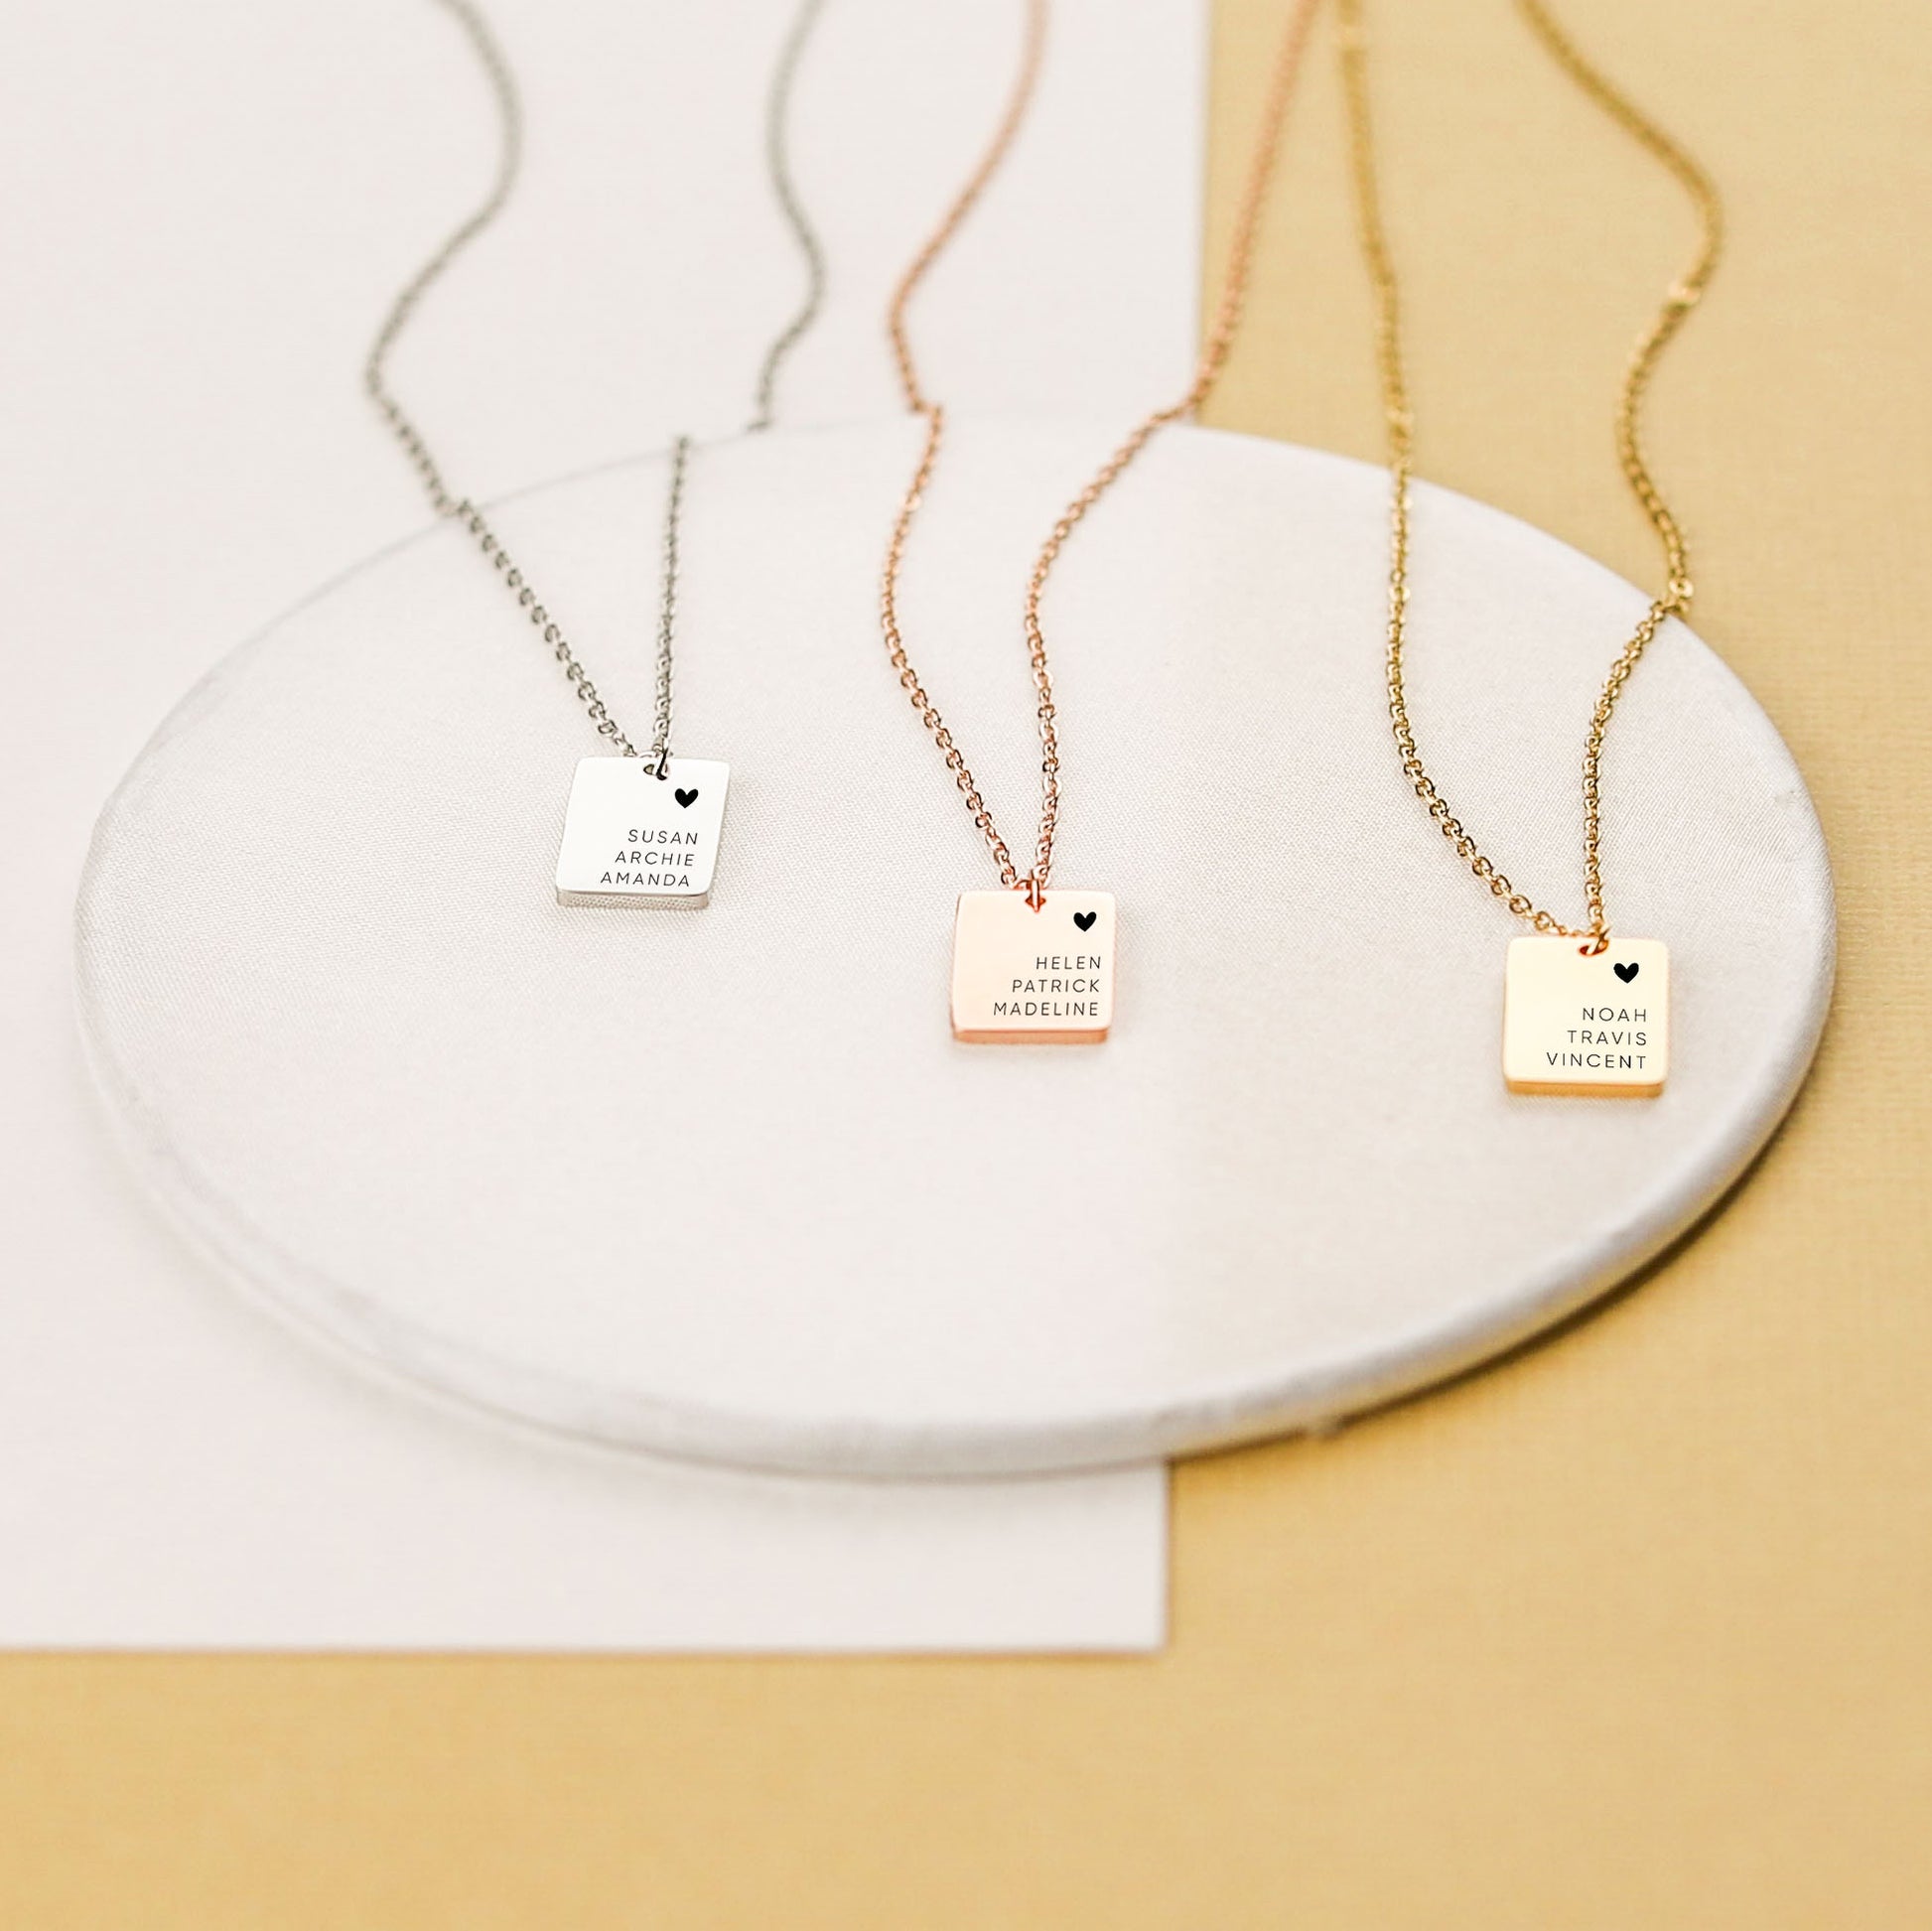 3 x 3.75″ Rounded Rectangle Necklace Cards